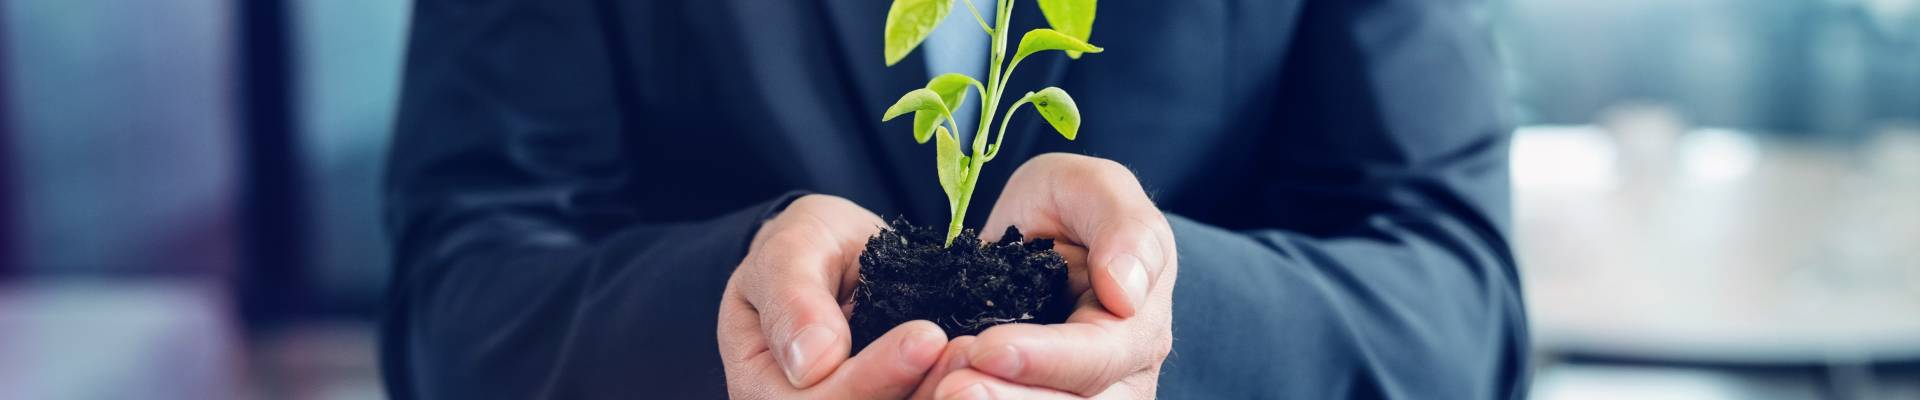 Lead Nurturing: what is it and how does it work?